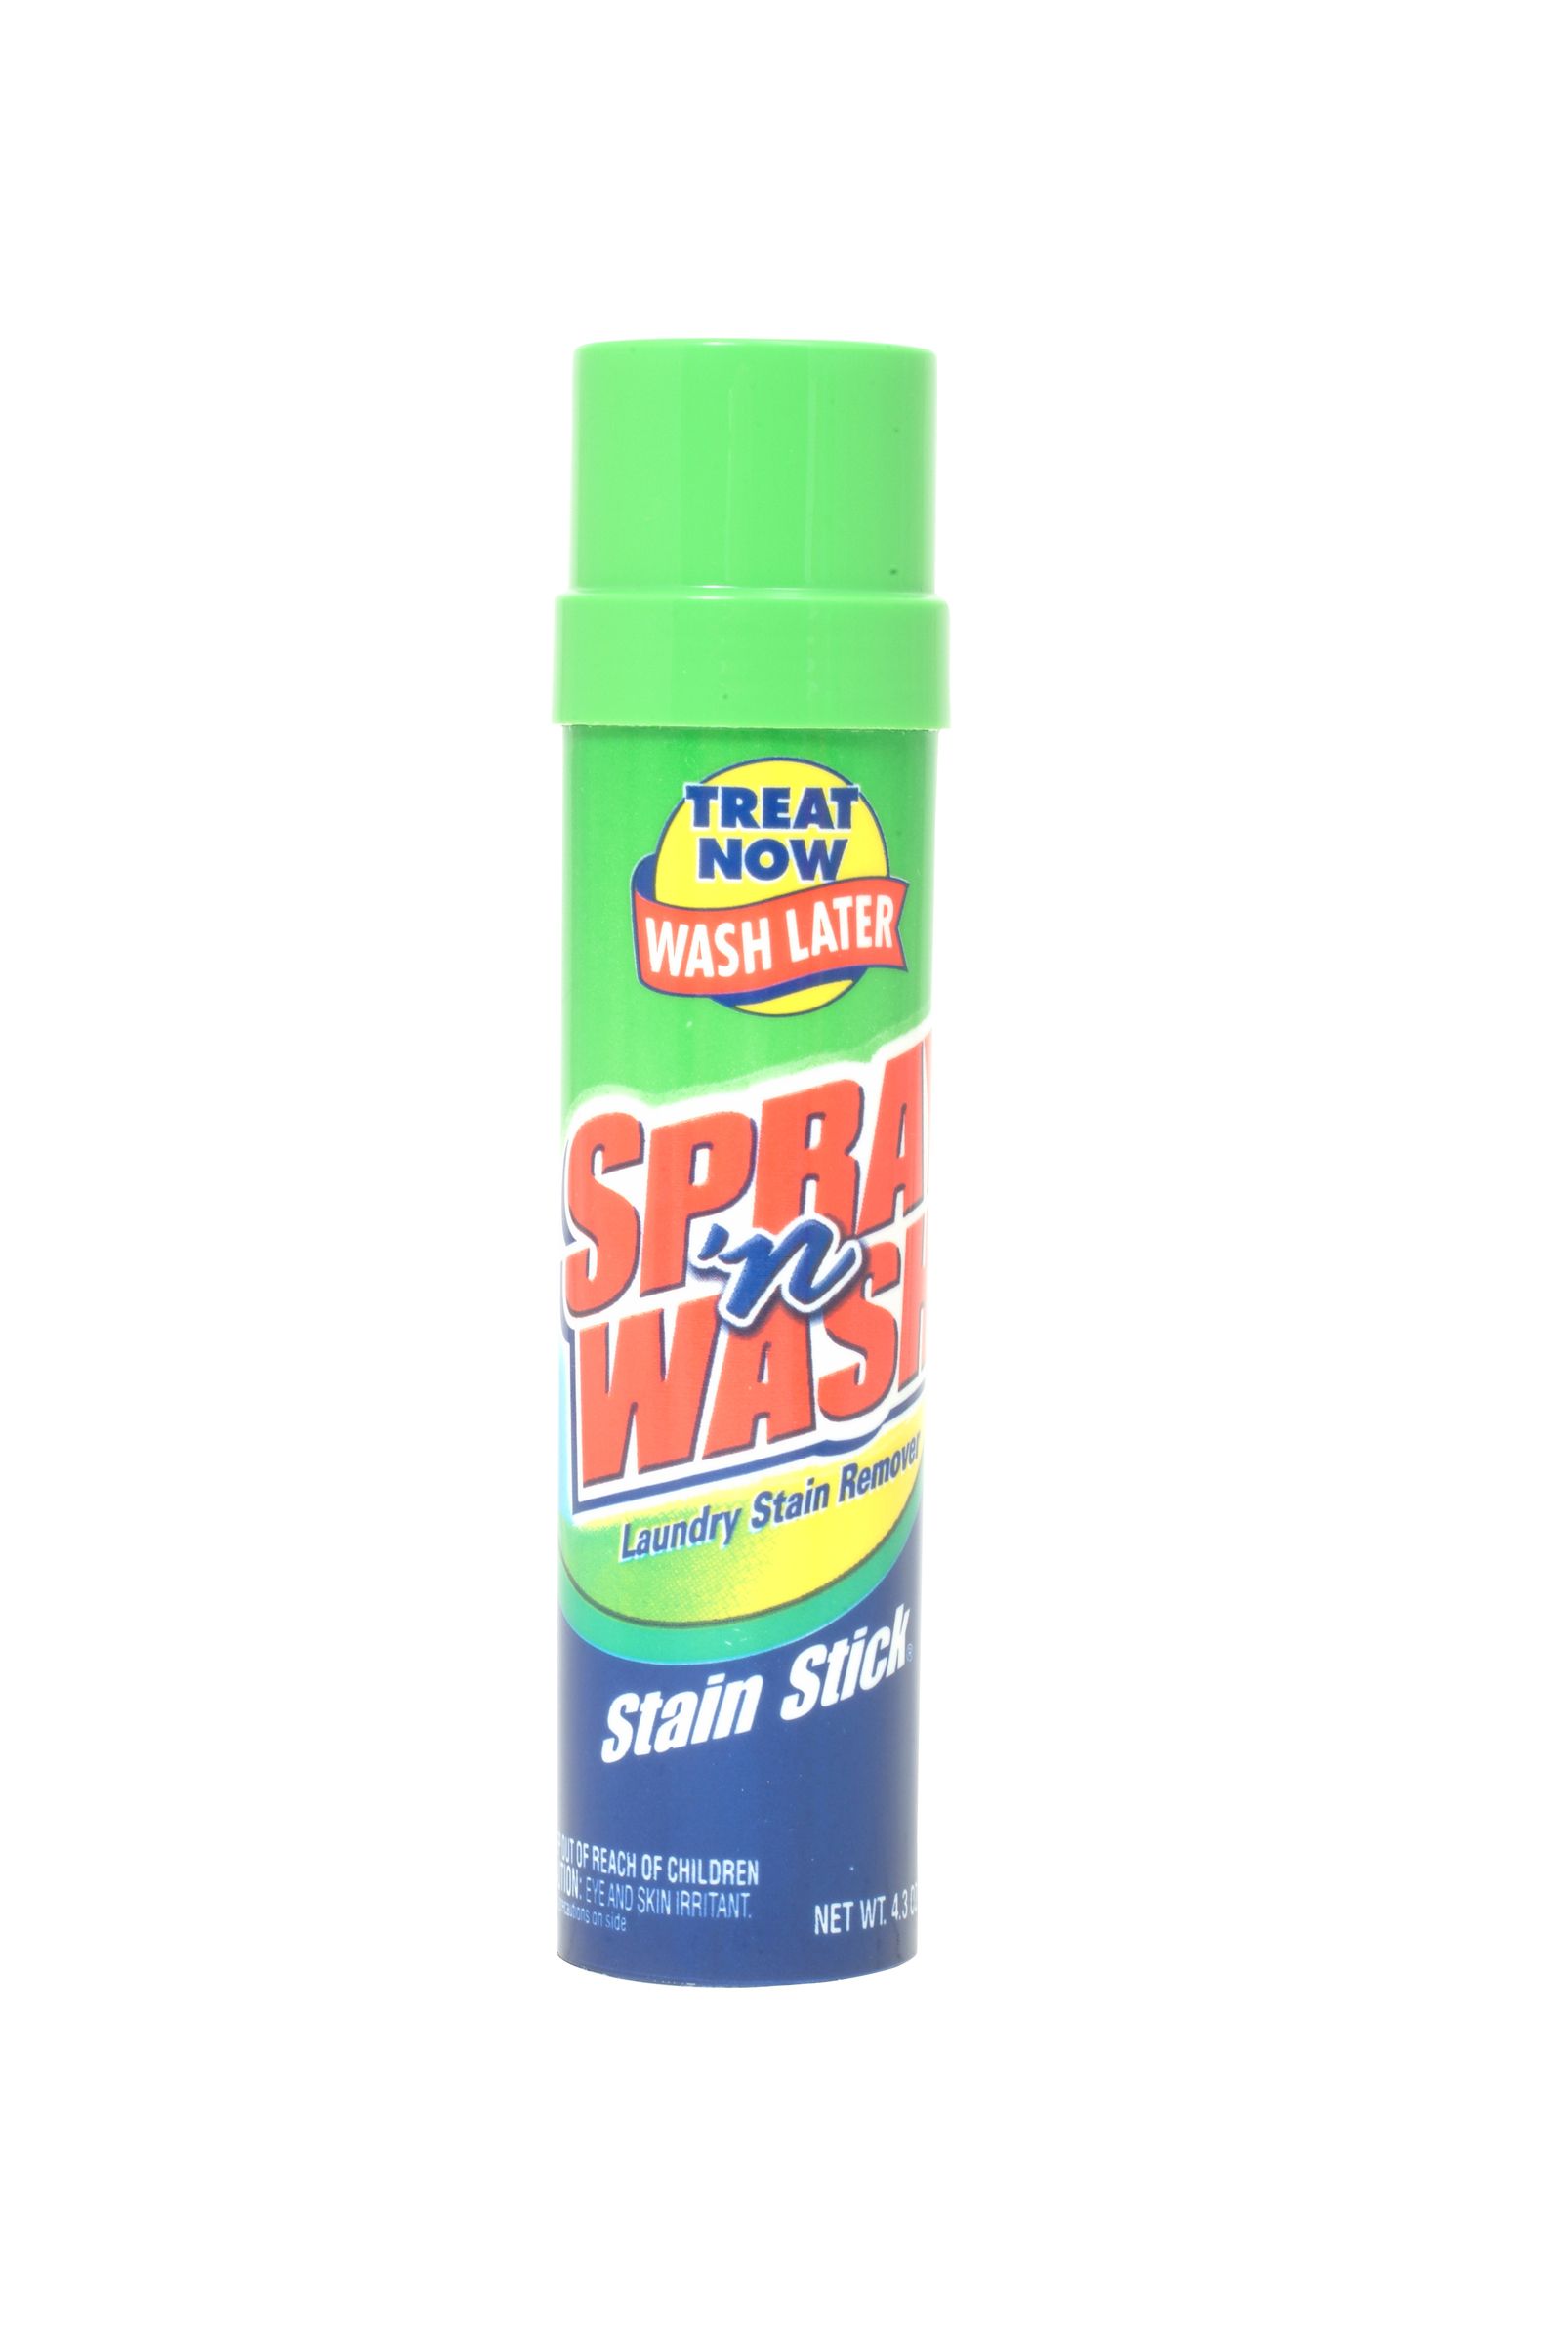 Spray 'N Wash Stain Stick 4.4 ounce